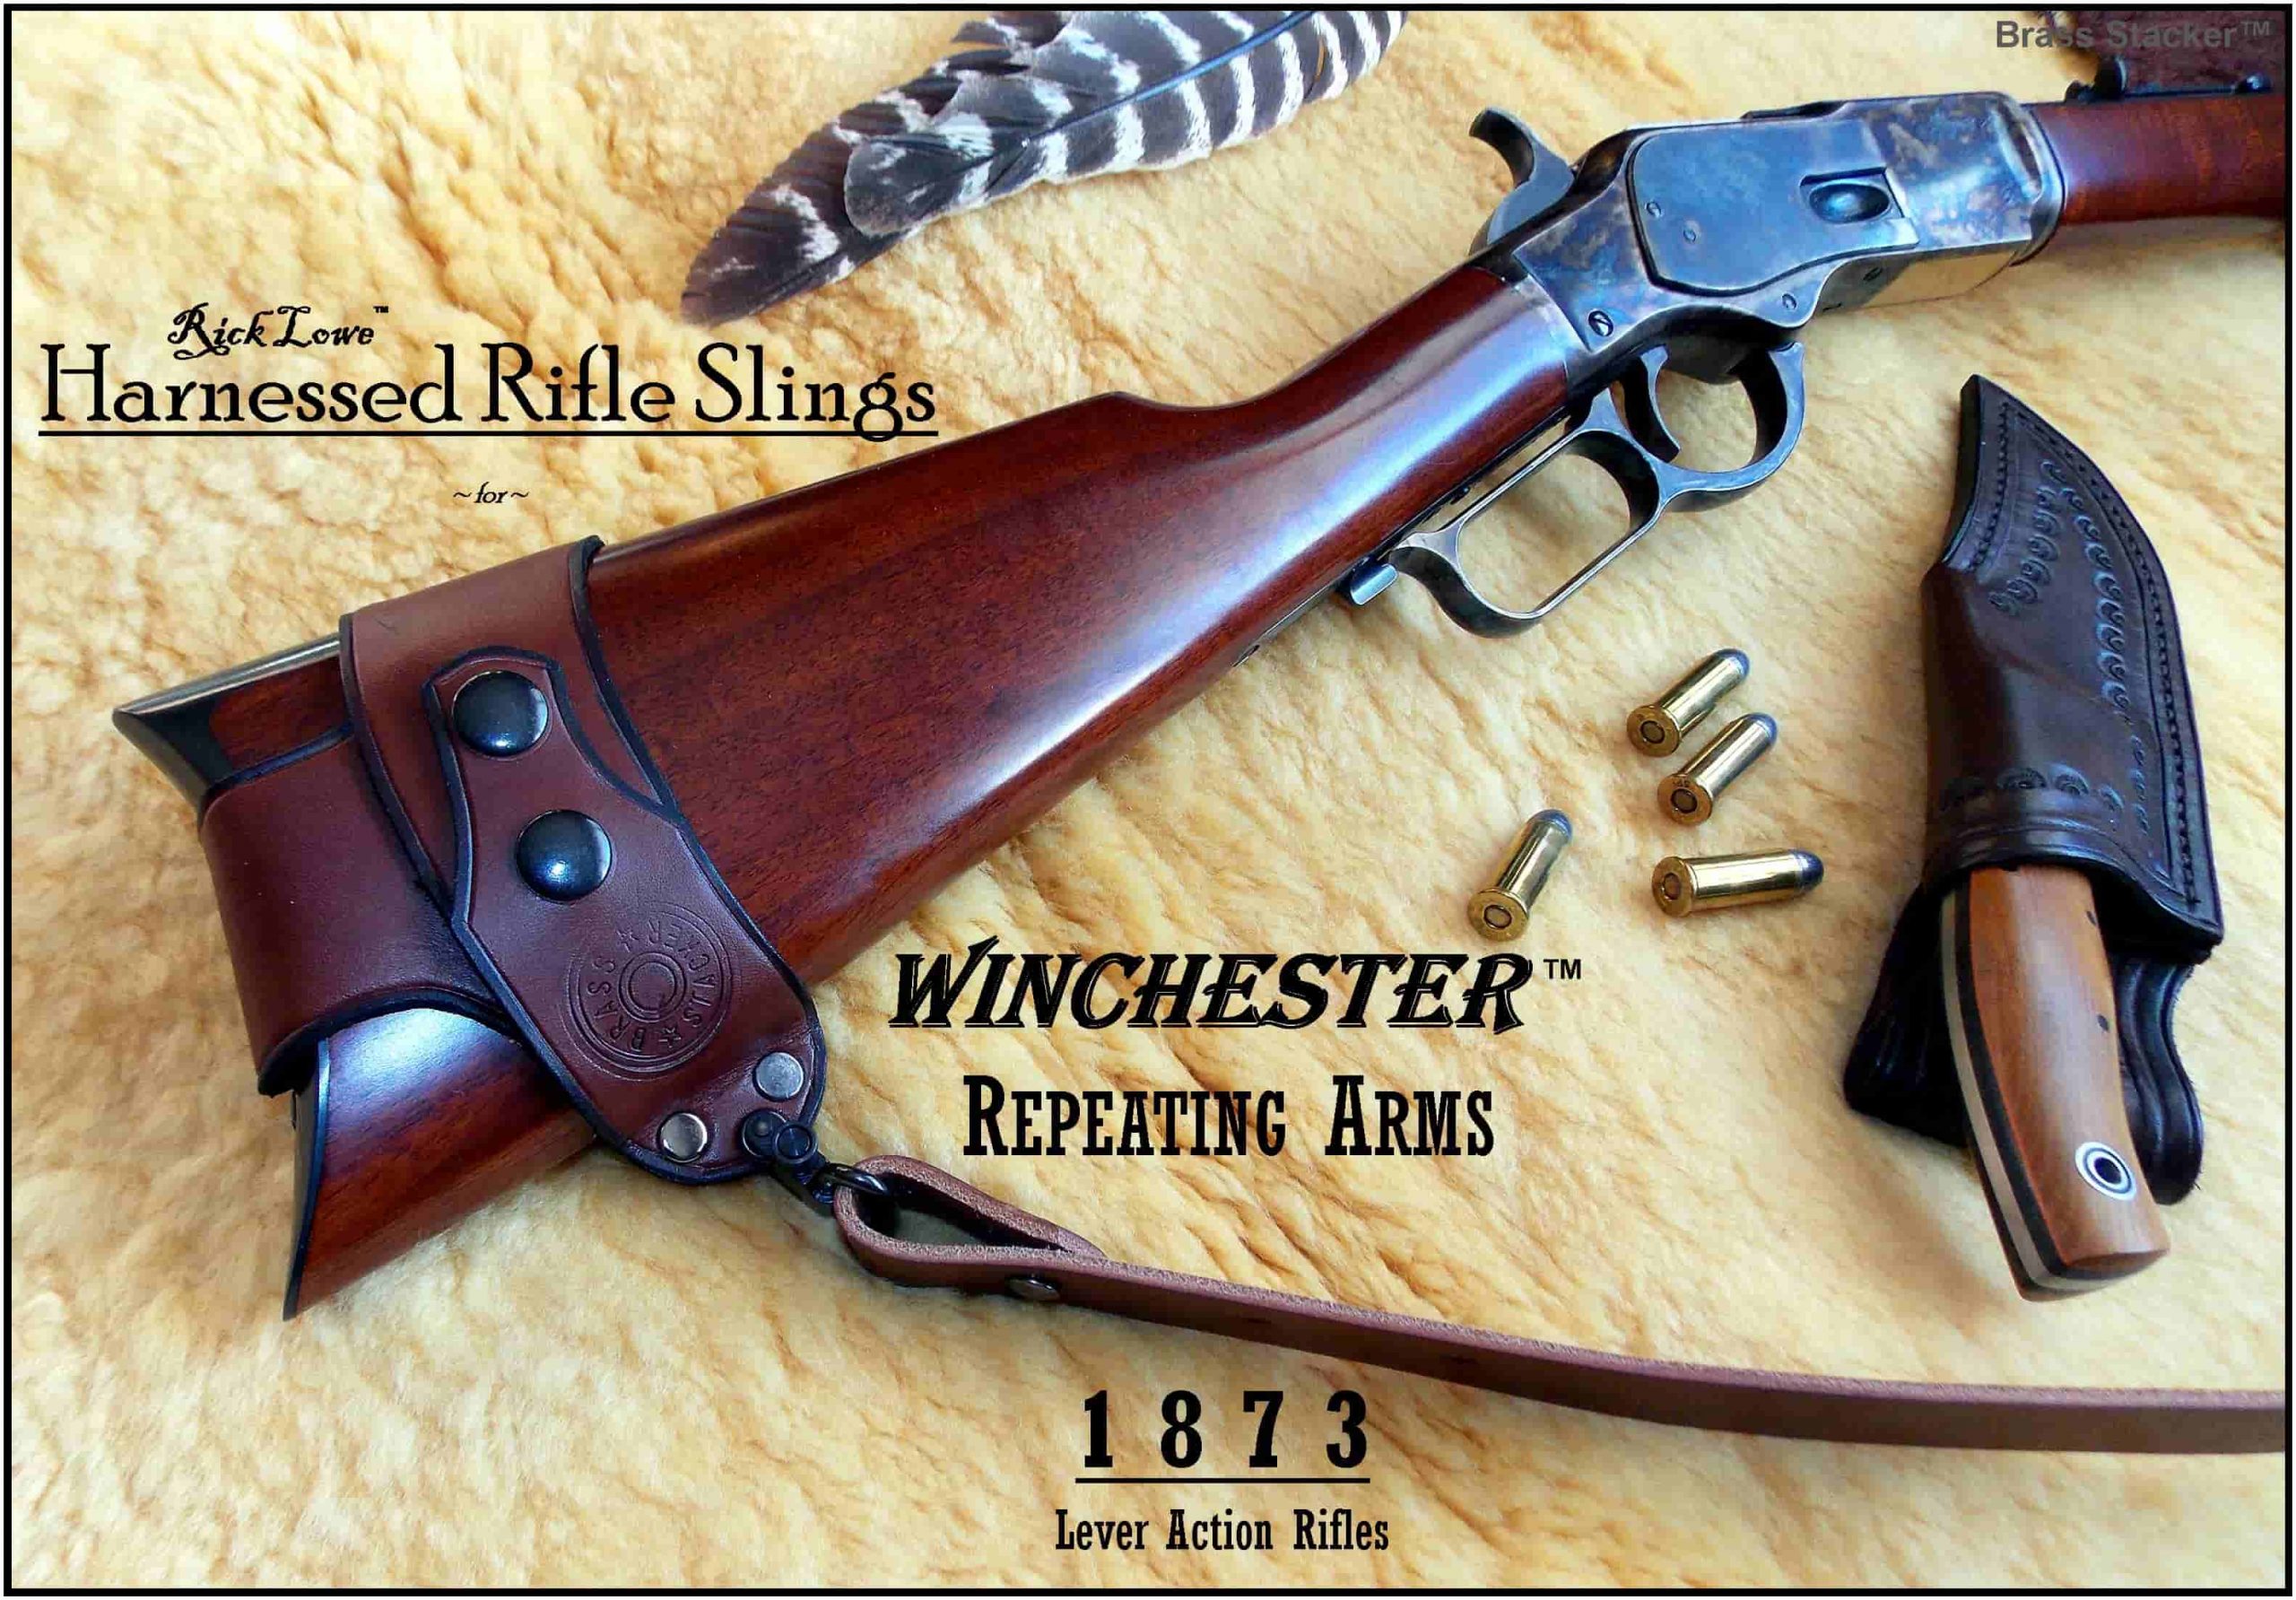 Brass Stacker Rlo No Drill Harnessed Rifle Sling For Winchester | My ...